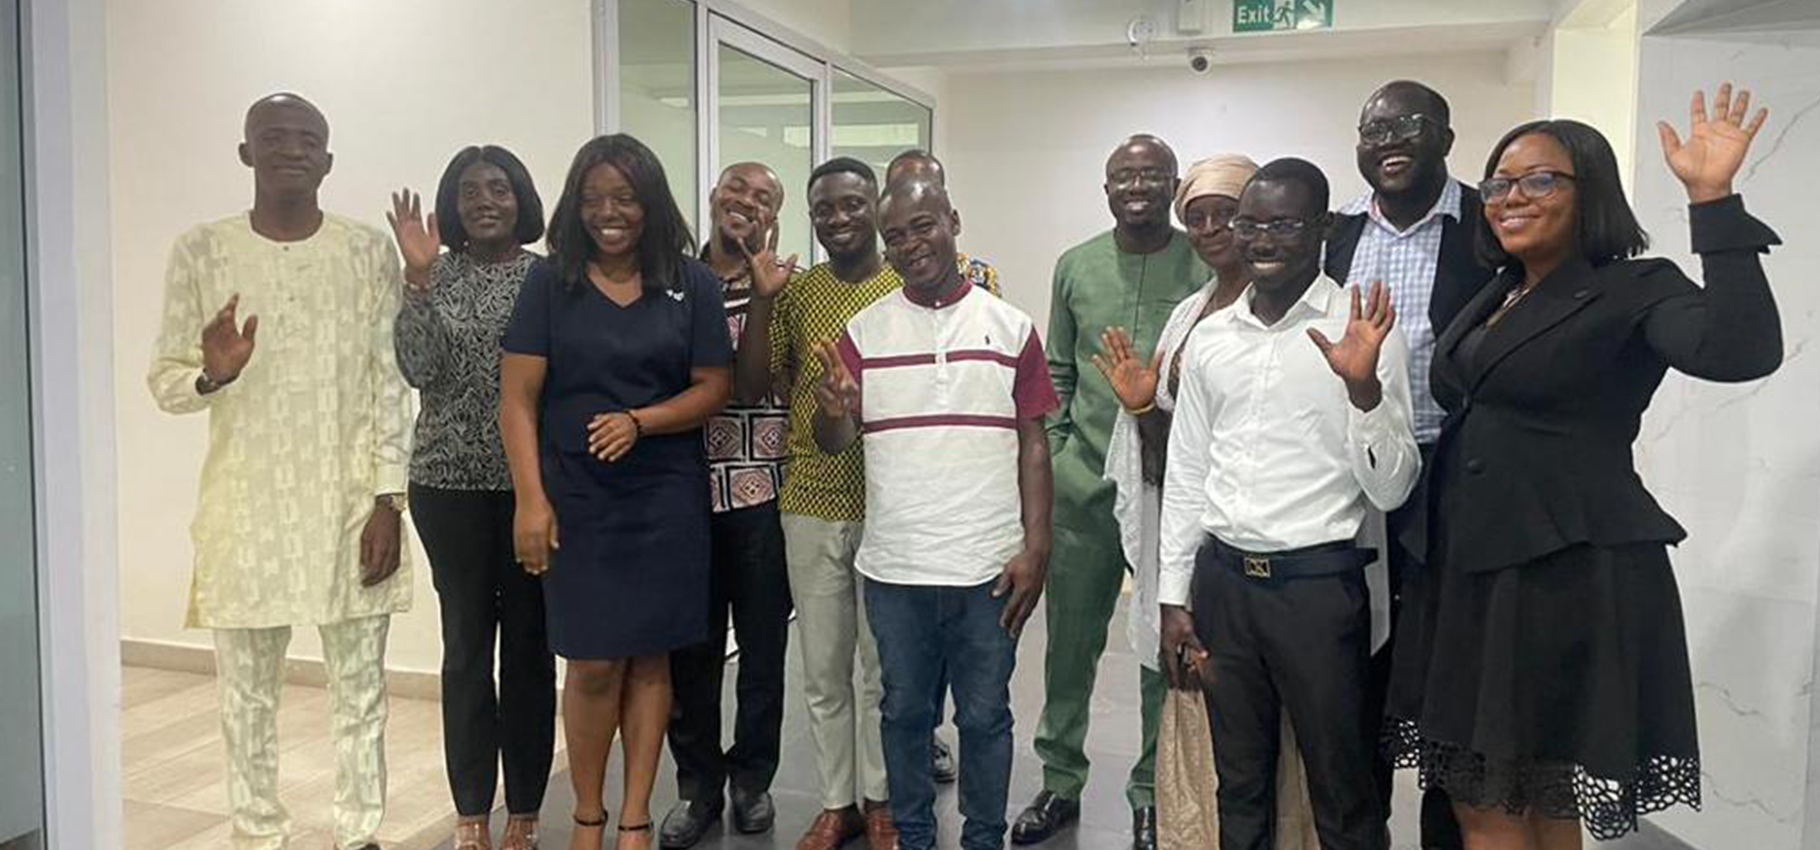 Enterprise Bureau pulled off its 1st Edition of EB Connect Series